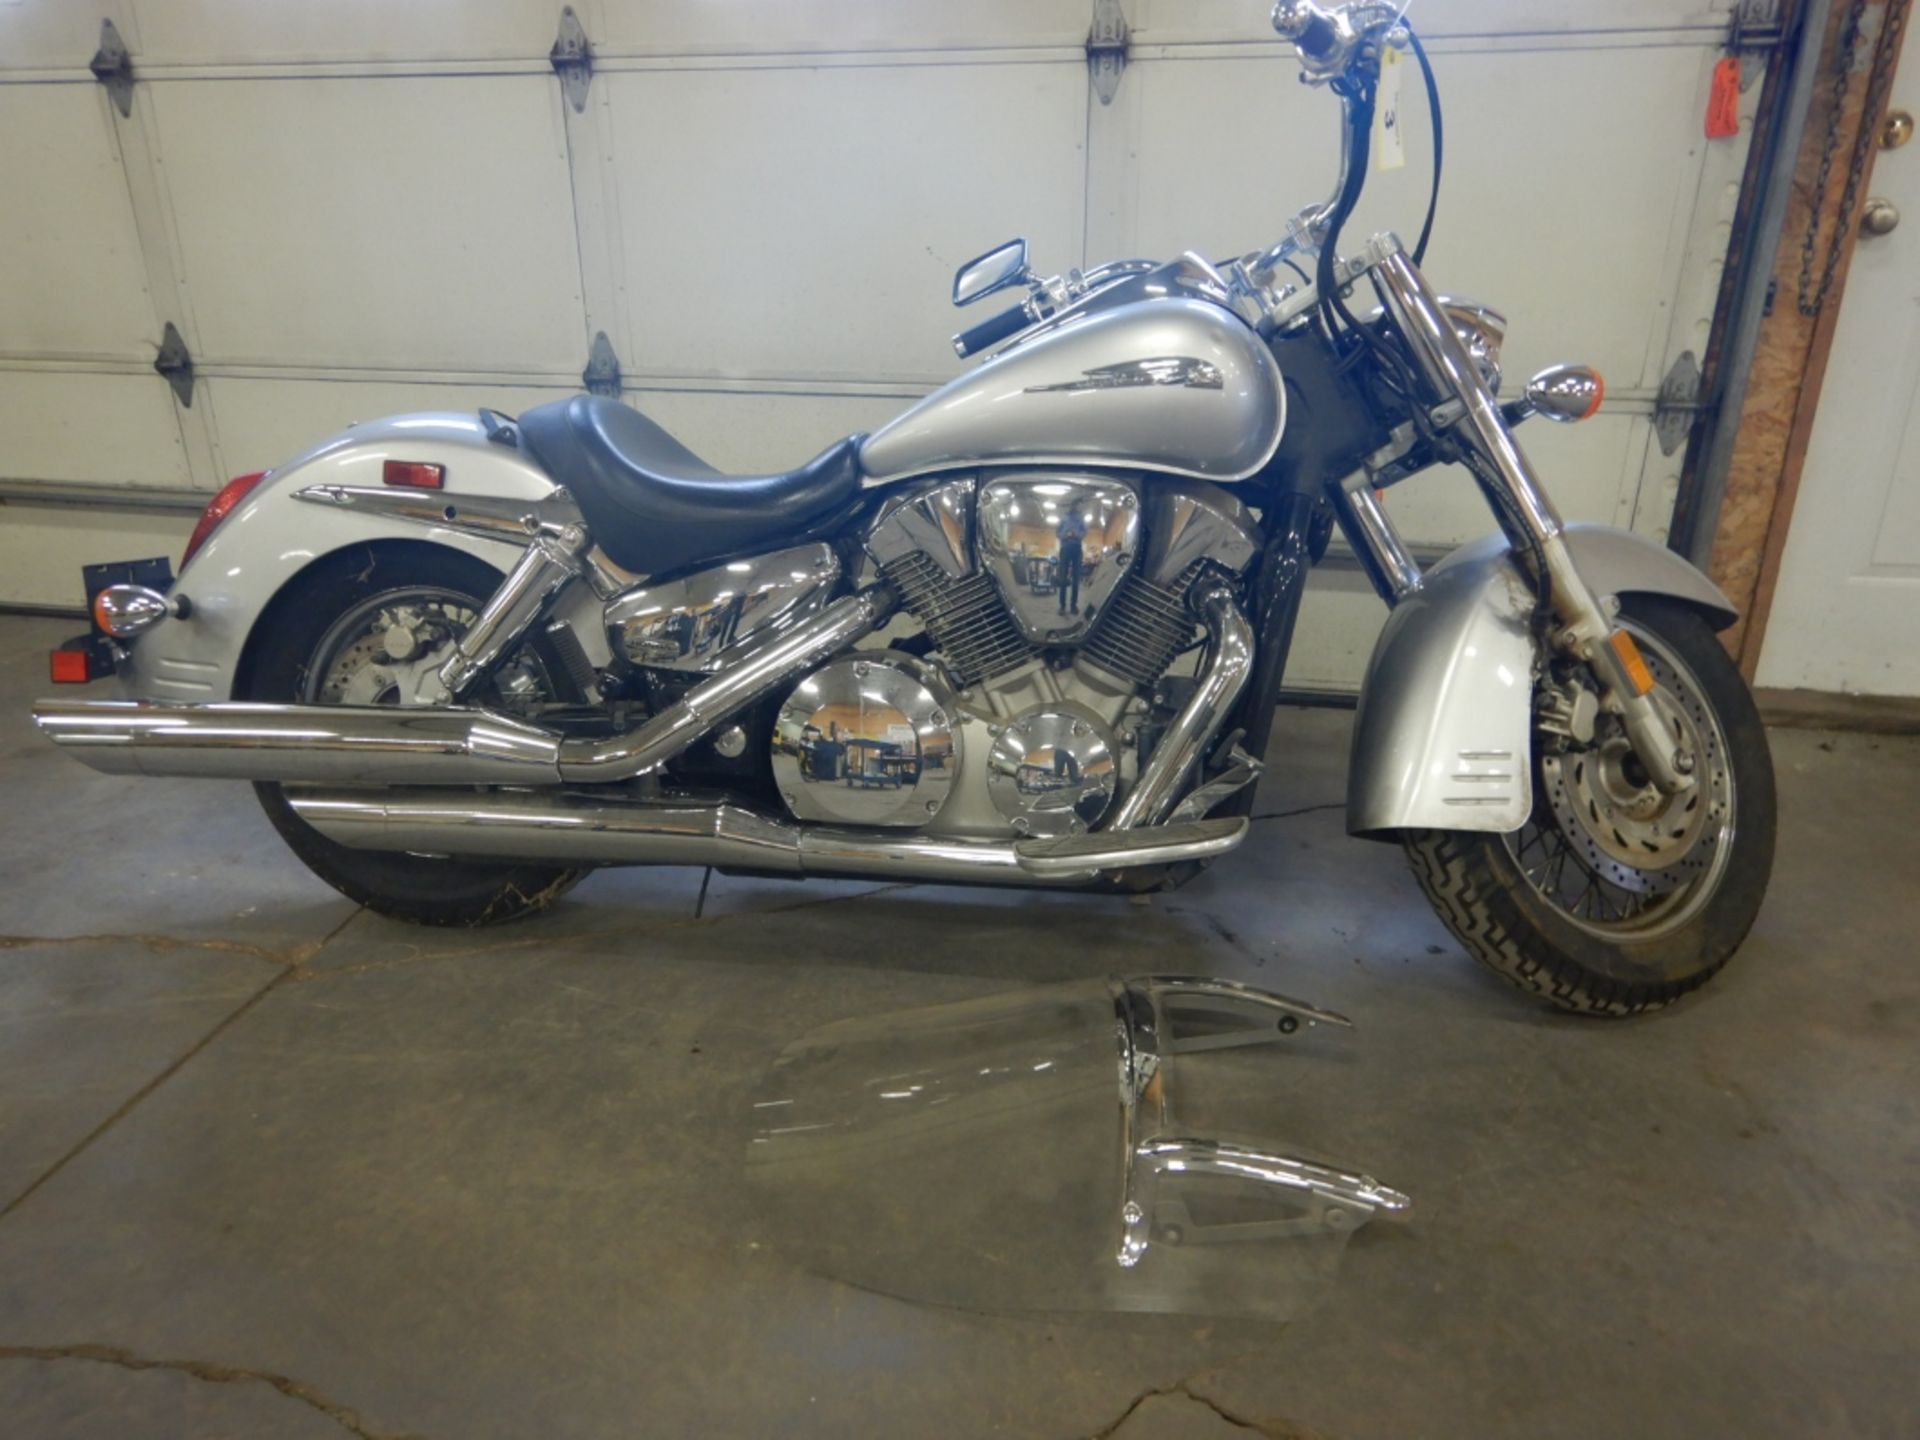 2006 HONDA VTX1300S6 MOTORCYCLE W/ WINDSHIELD INCLUDED (INSTALLATION REQUIRED) 5067 KM SHOWING - Image 11 of 12